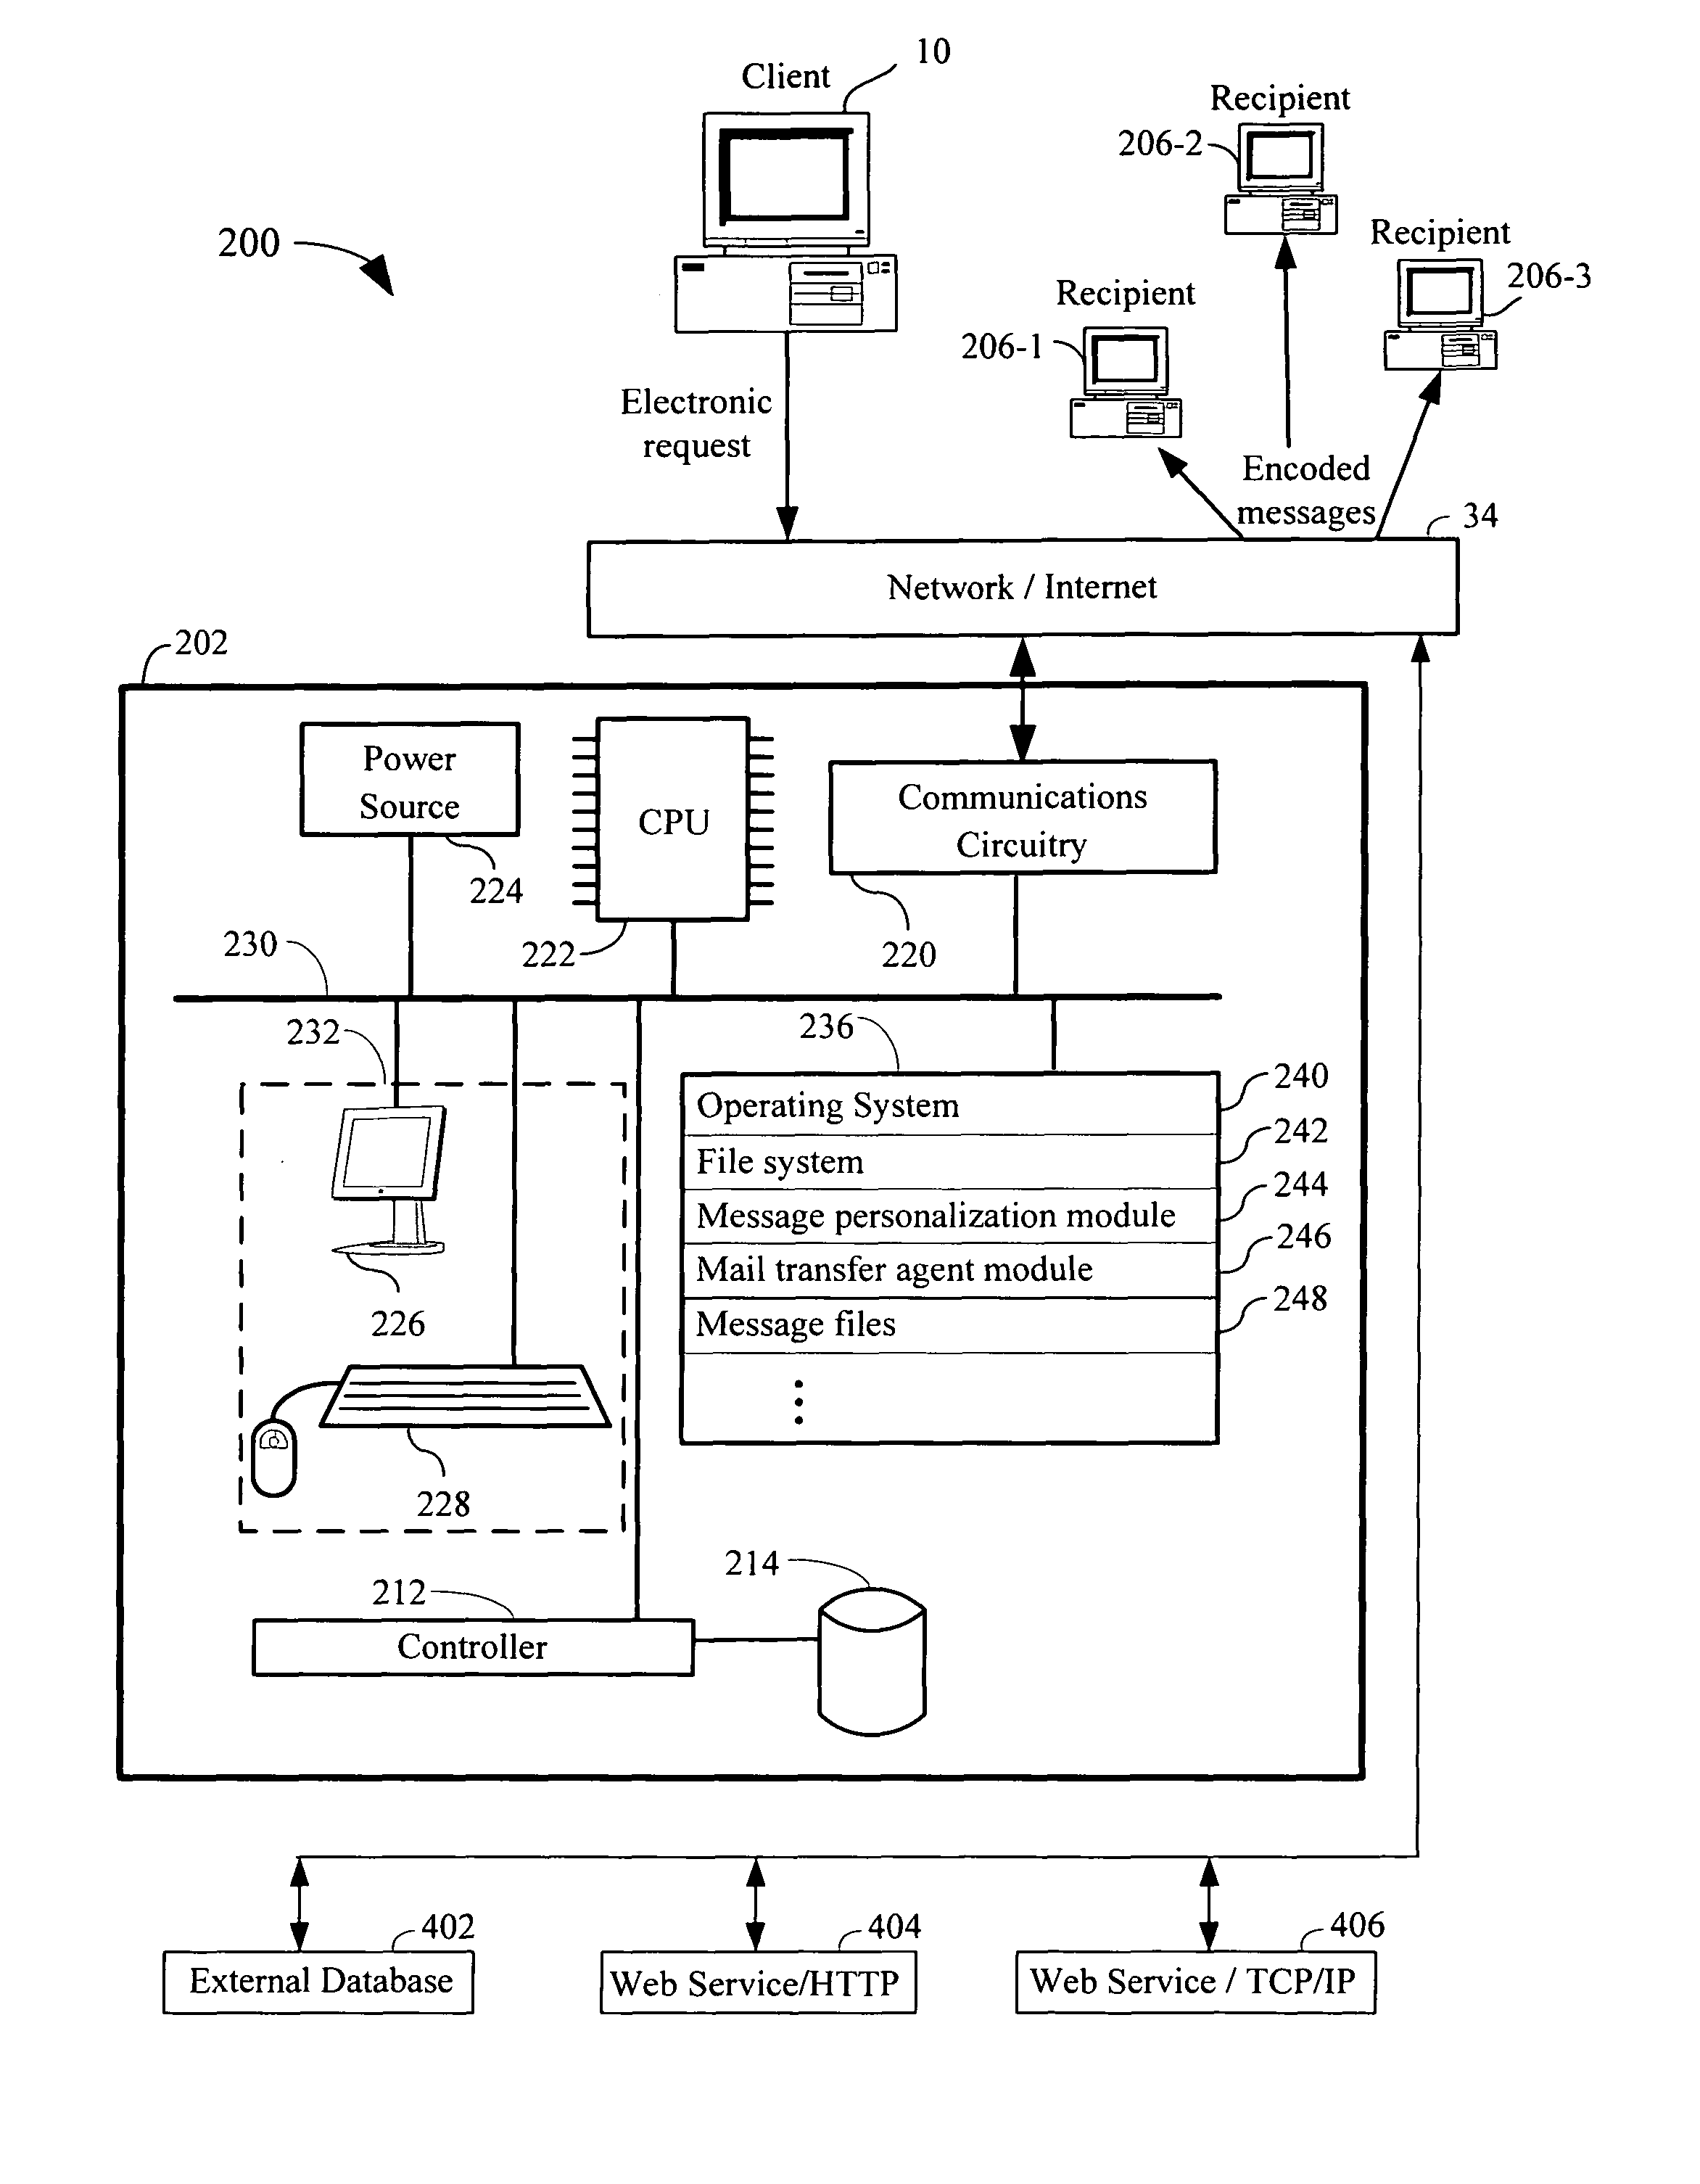 Systems and methods for communicating logic in e-mail messages